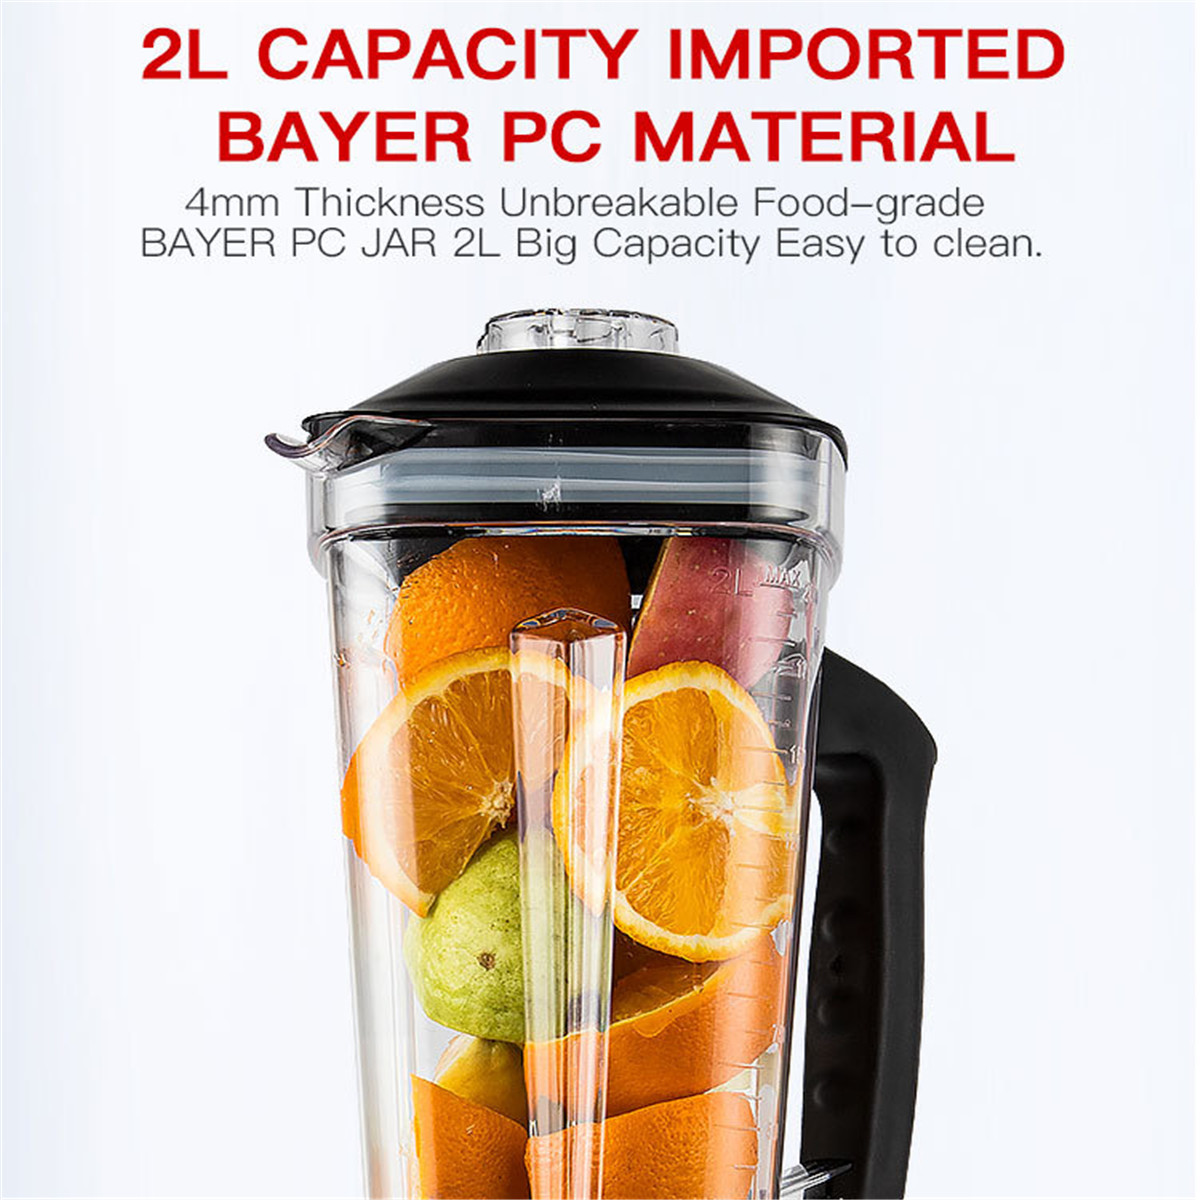 Digital-3HP-BPA-FREE-2L-Automatic-Touchpad-Professional-Blender-Mixer-Juicer-1848947-4